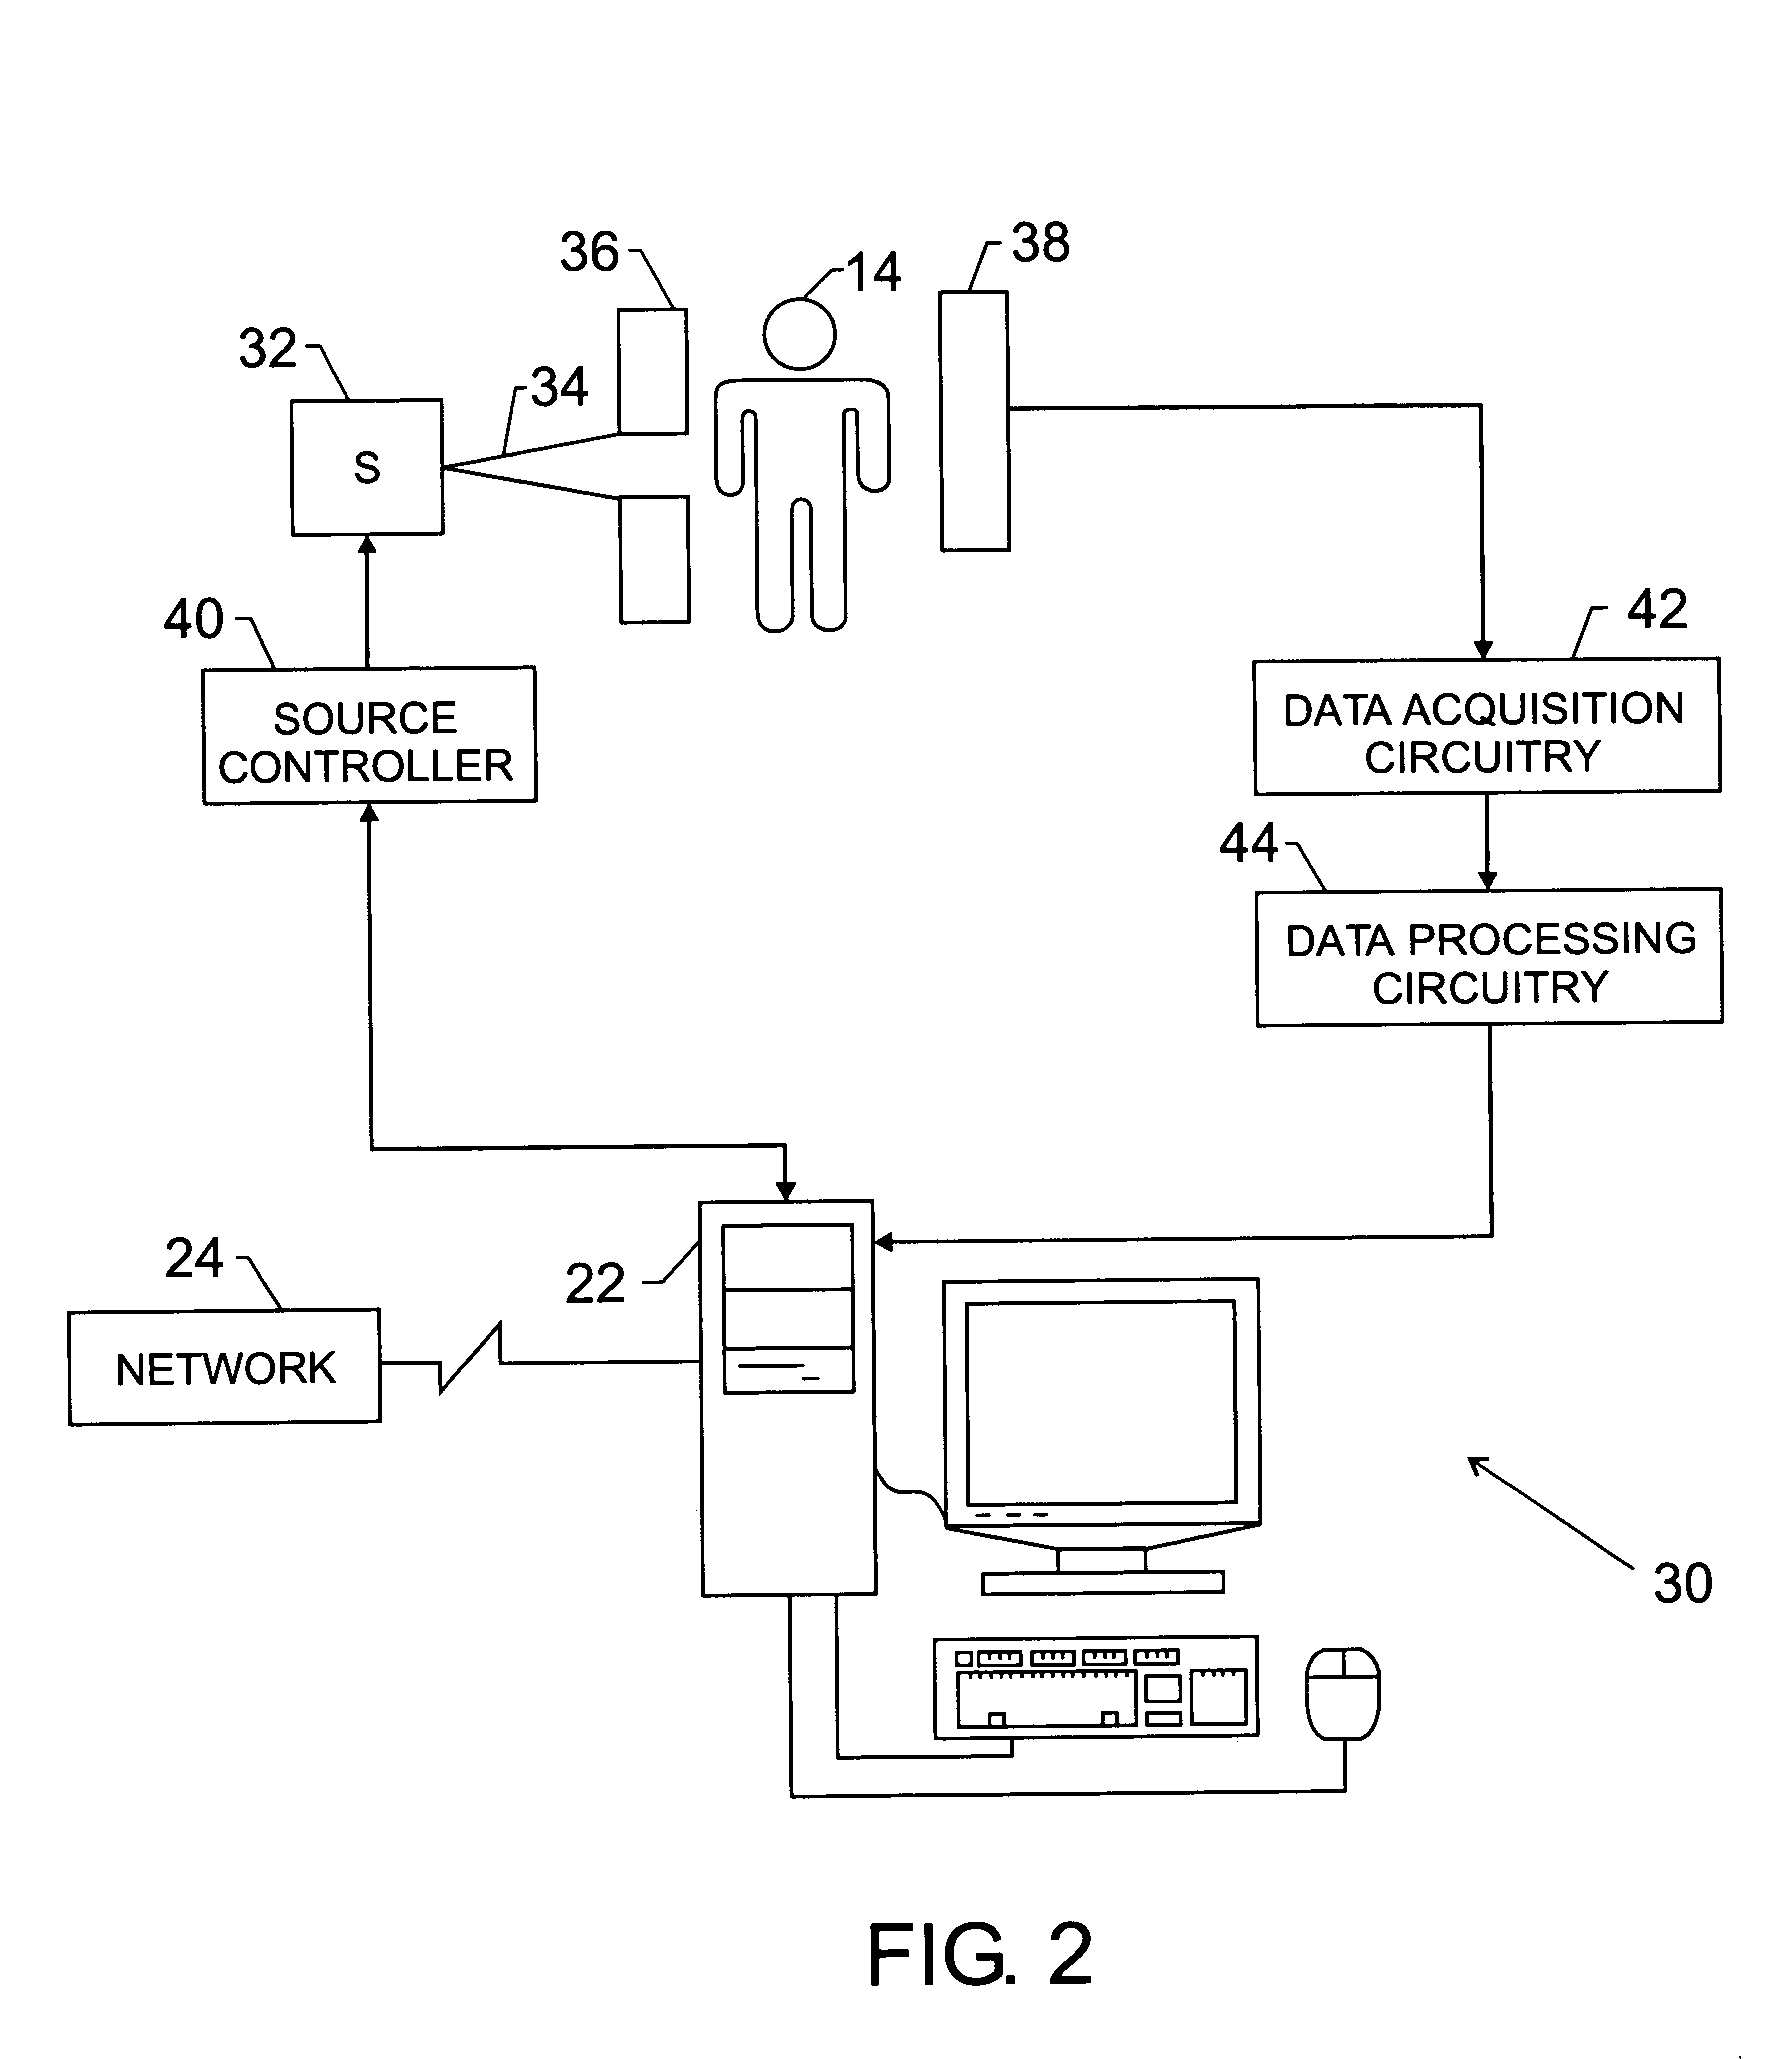 Auto-image alignment system and method based on identified anomalies